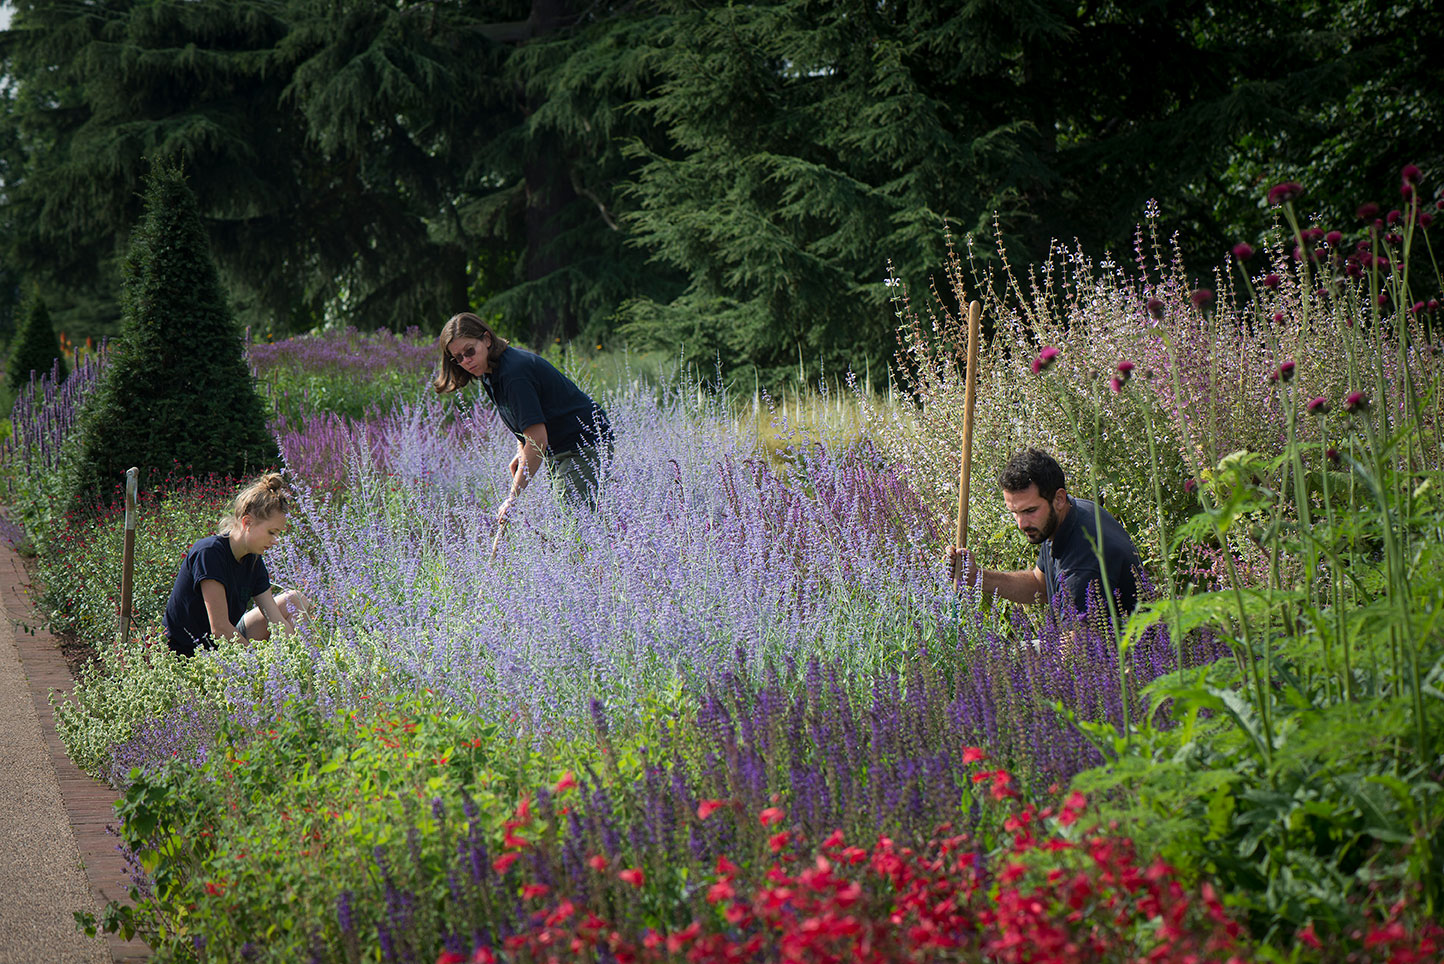 Horticulturalists working at Kew on the Great Broad Walk Borders